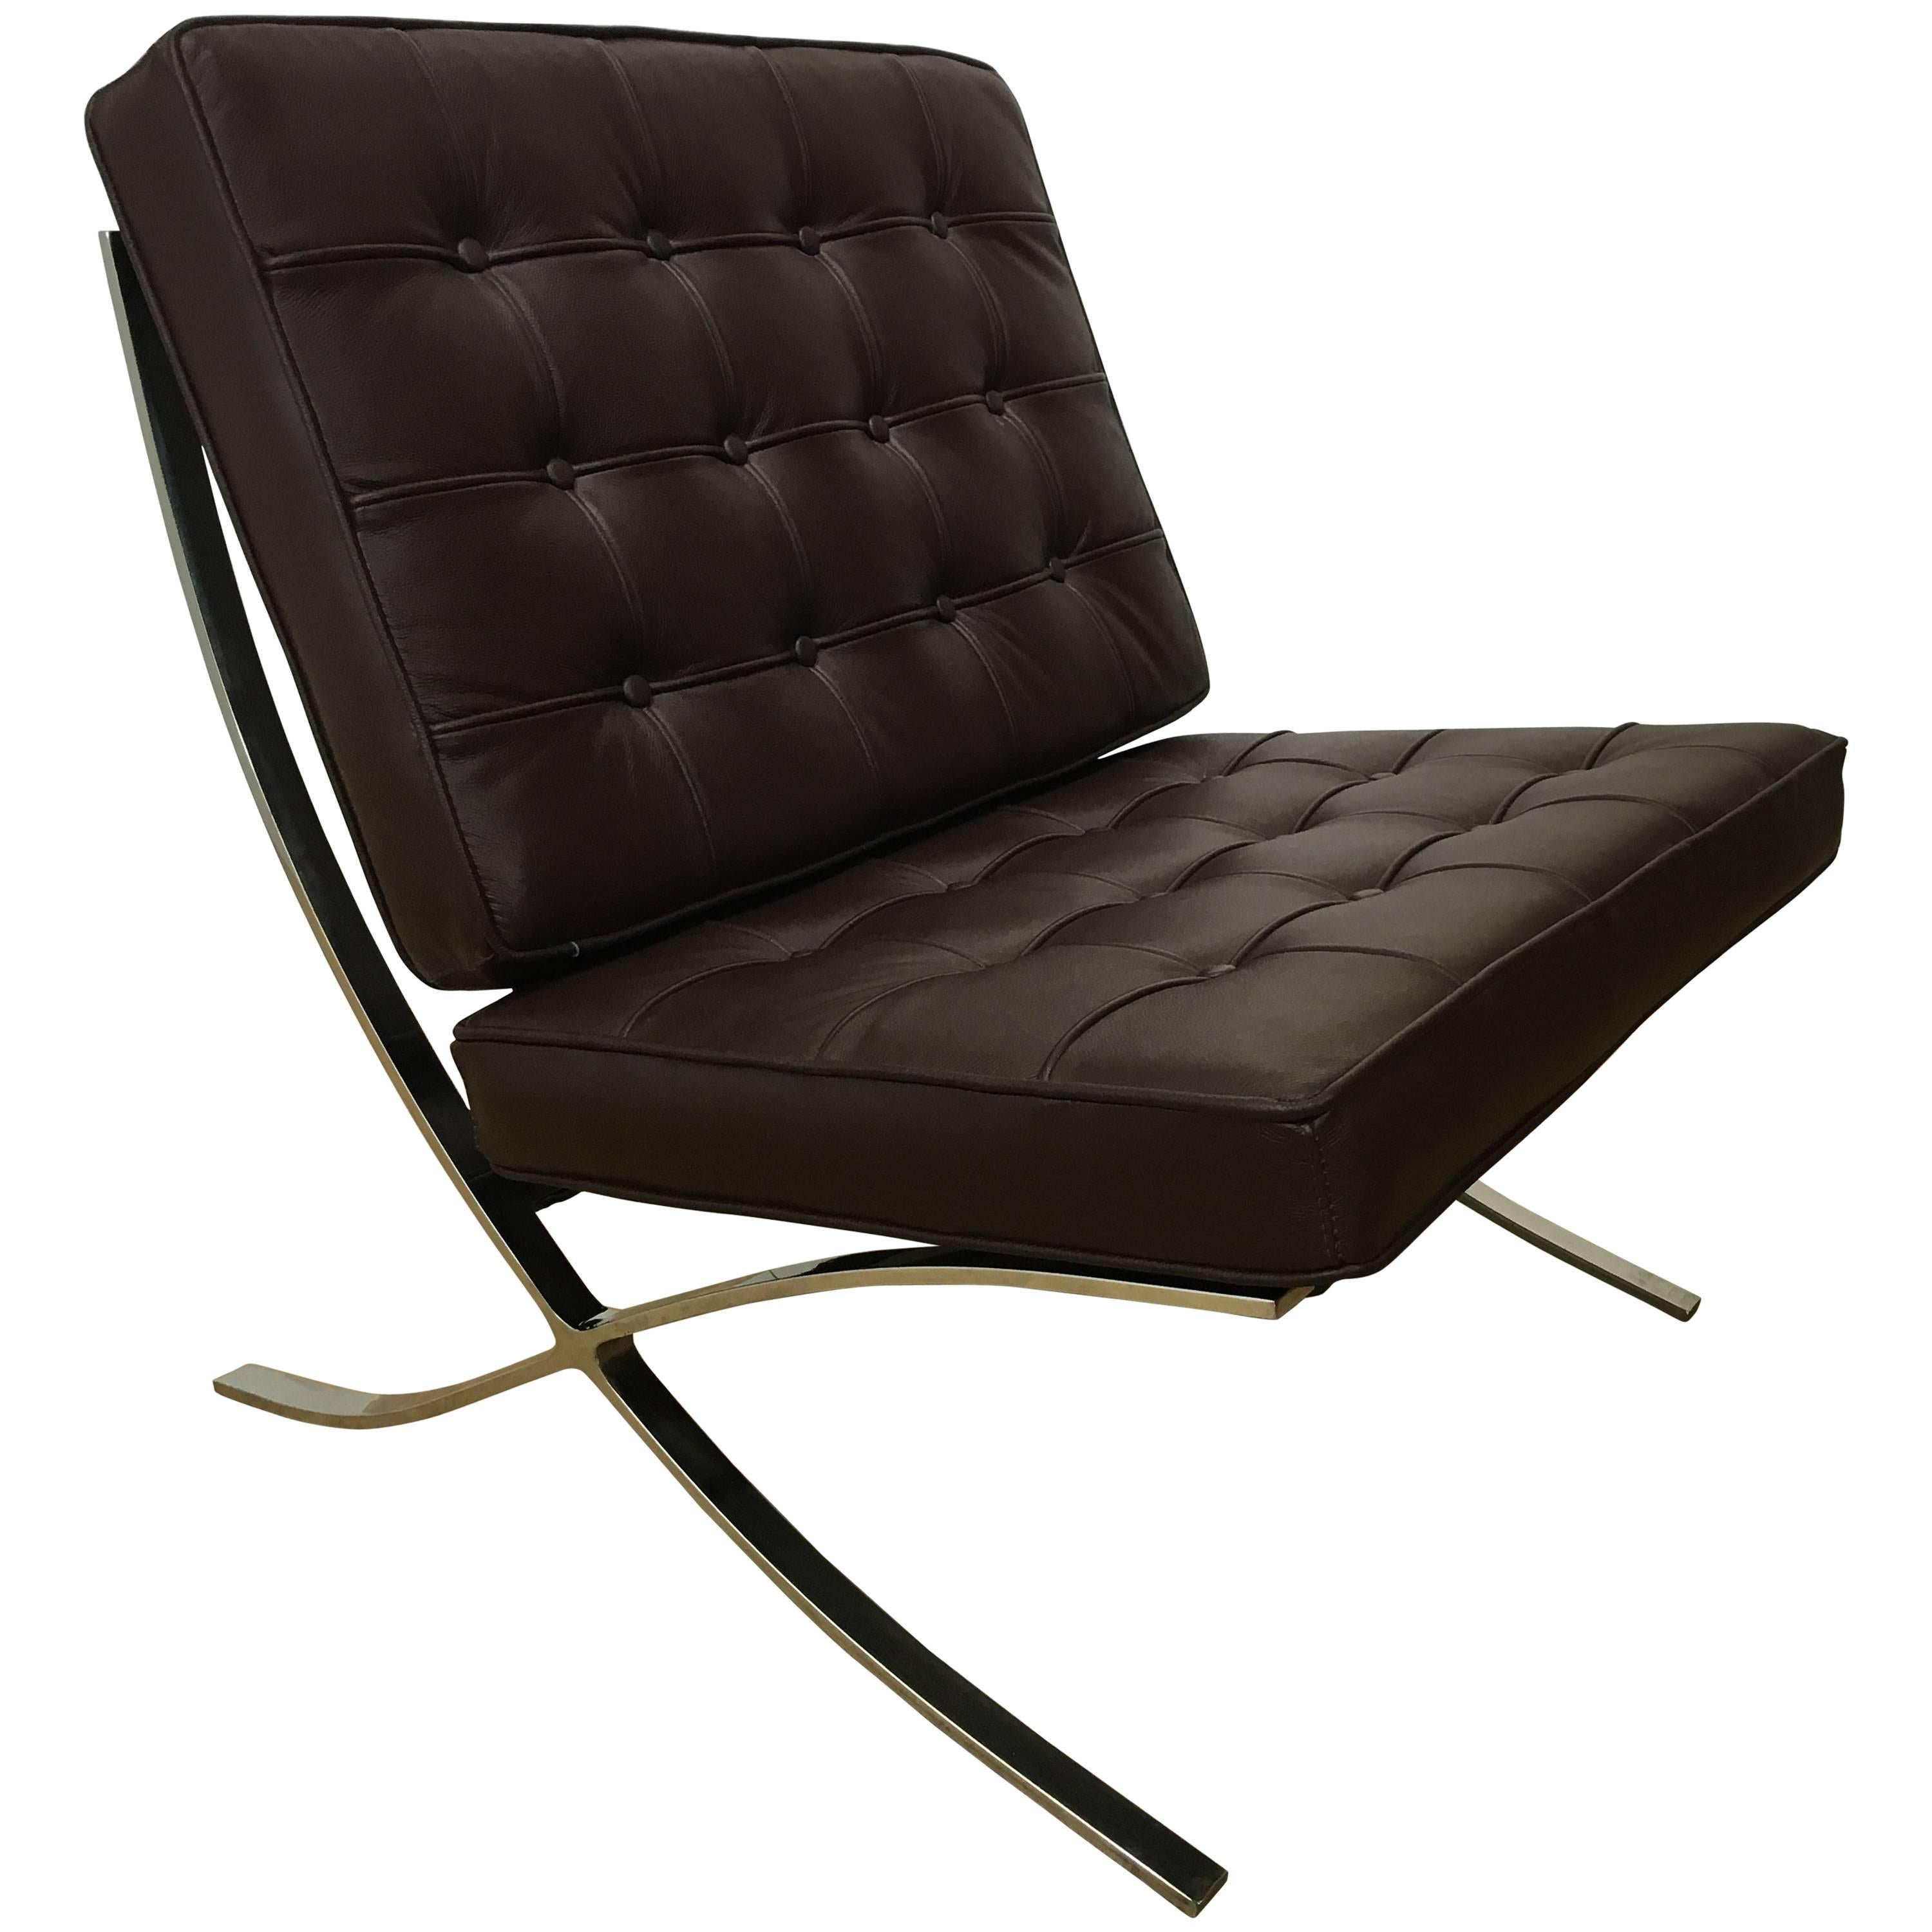  Brown Leather Barcelona Lounge Chair, After Mies van der Rohe